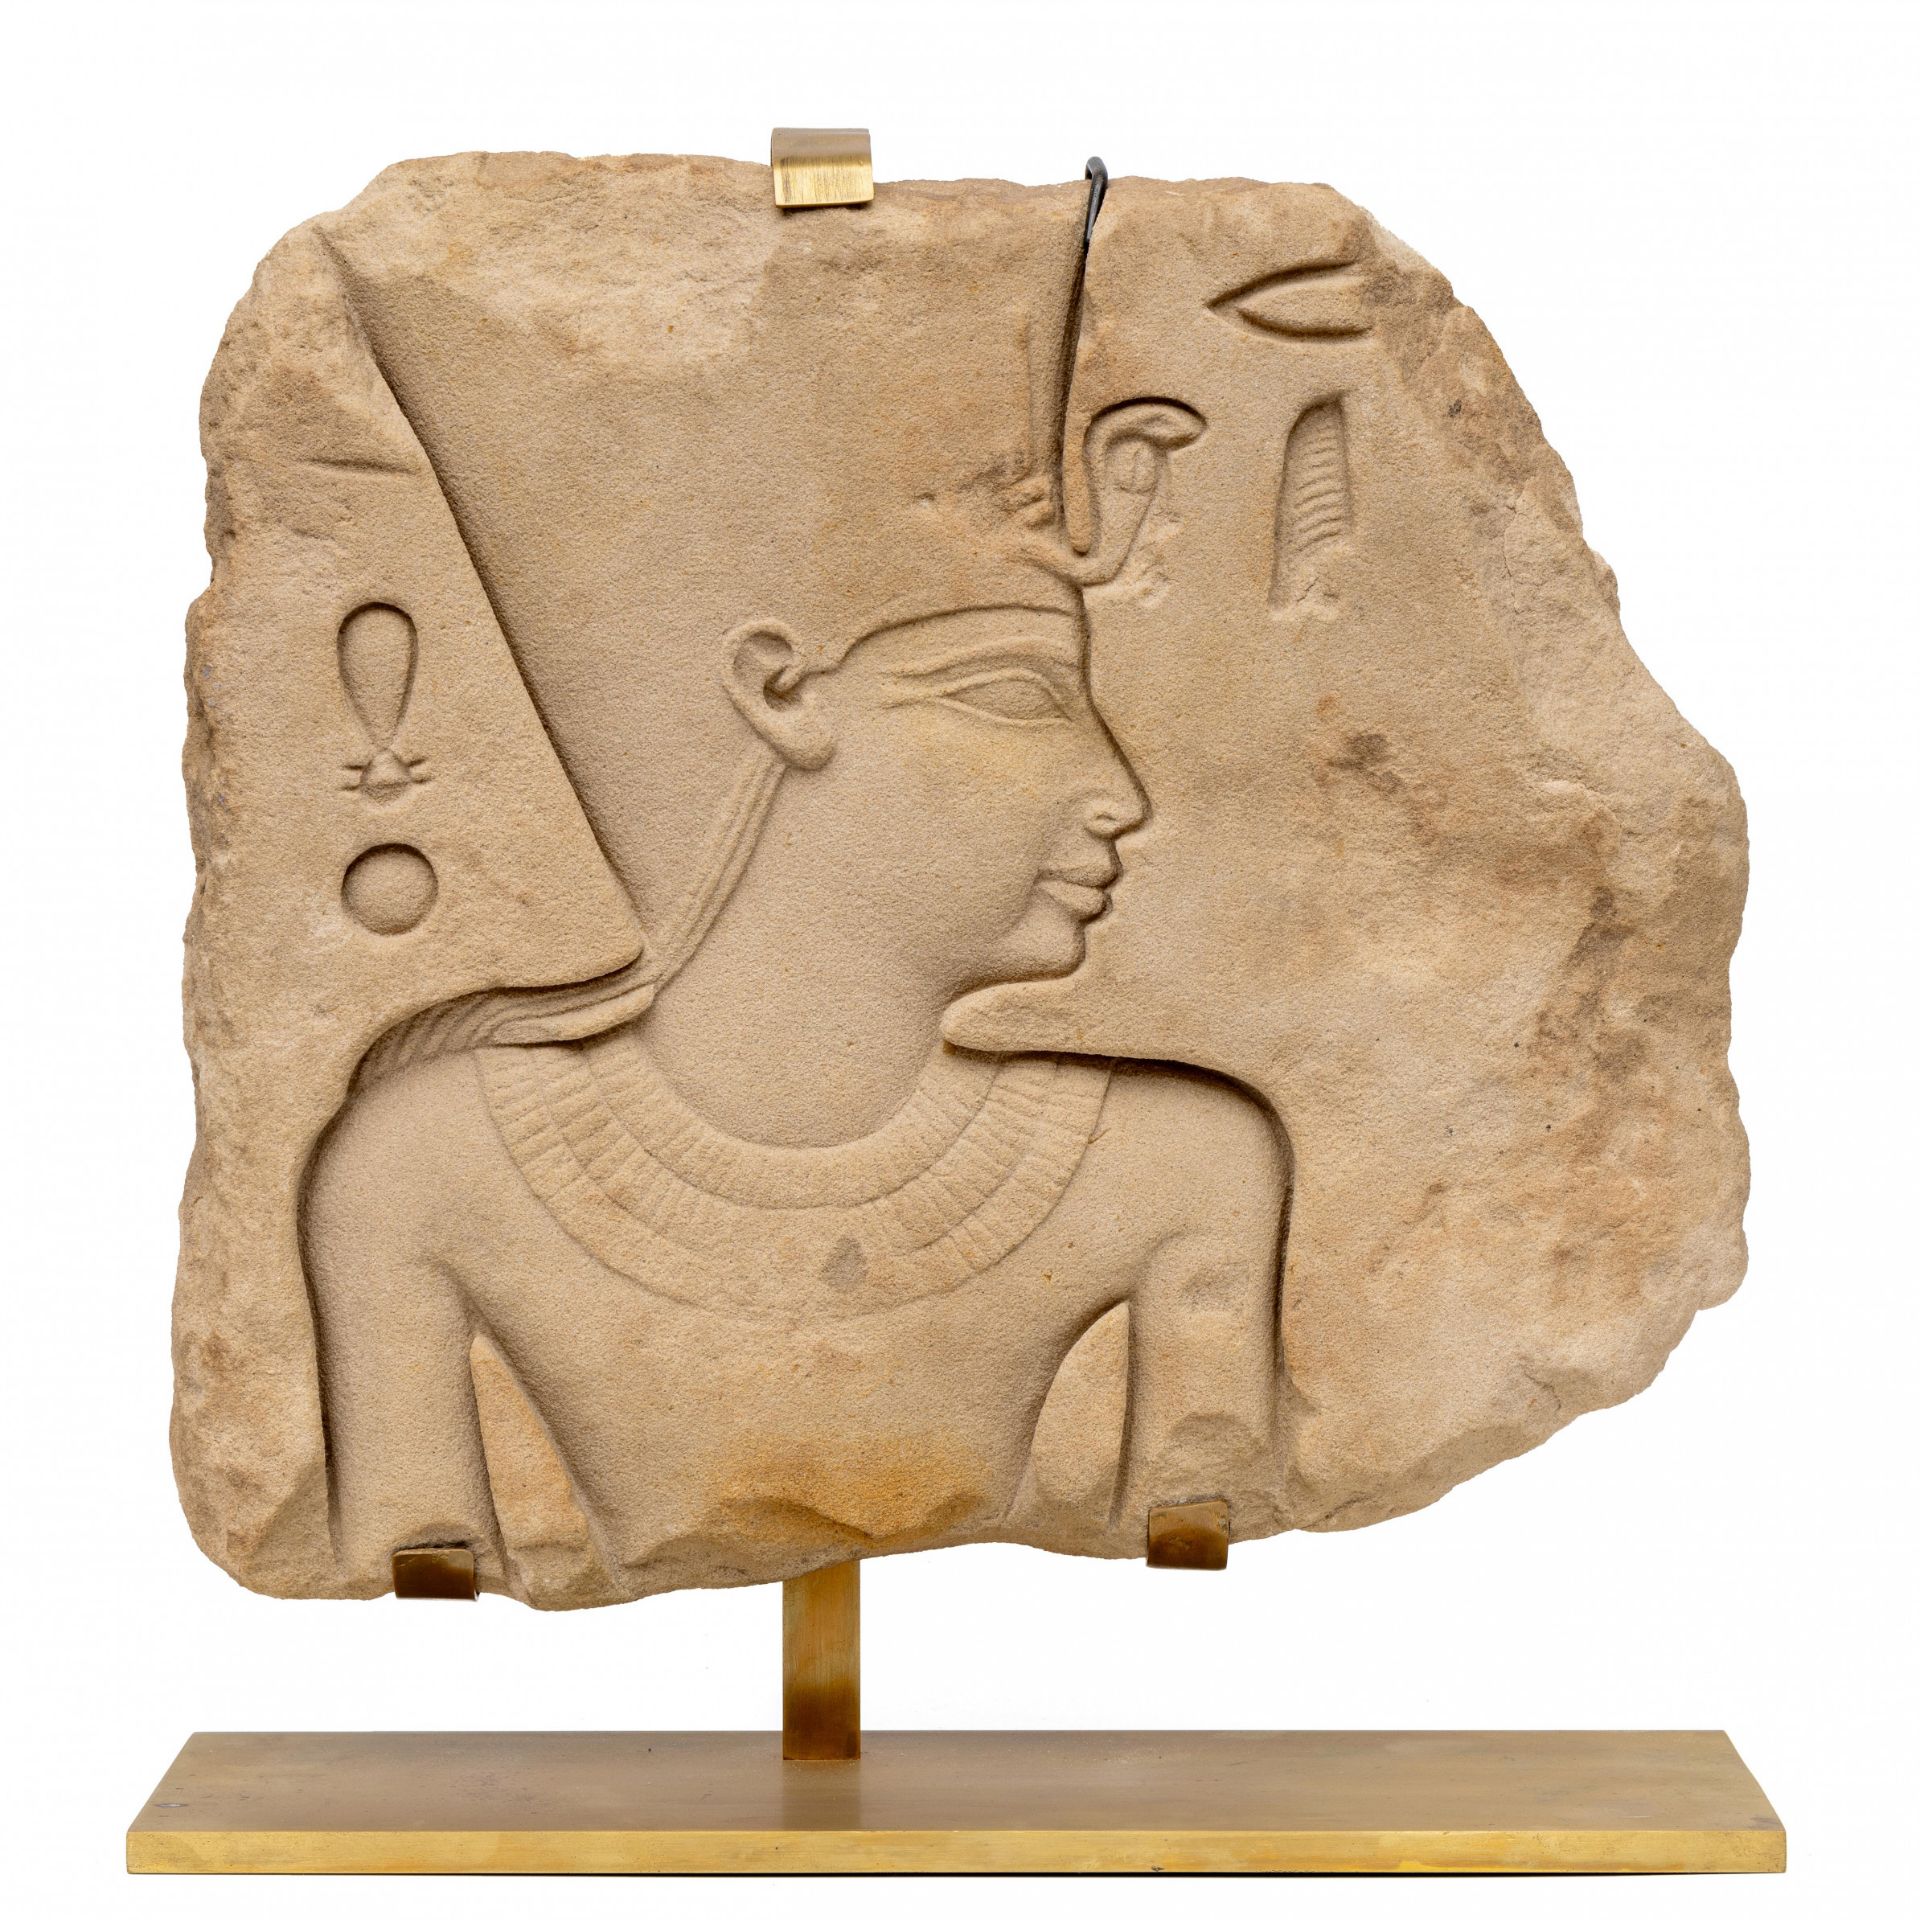 Egypt, Karnak/Luxor, sandstone fragment of a stele depicting a relief of pharoah, 1400-1300 BC with